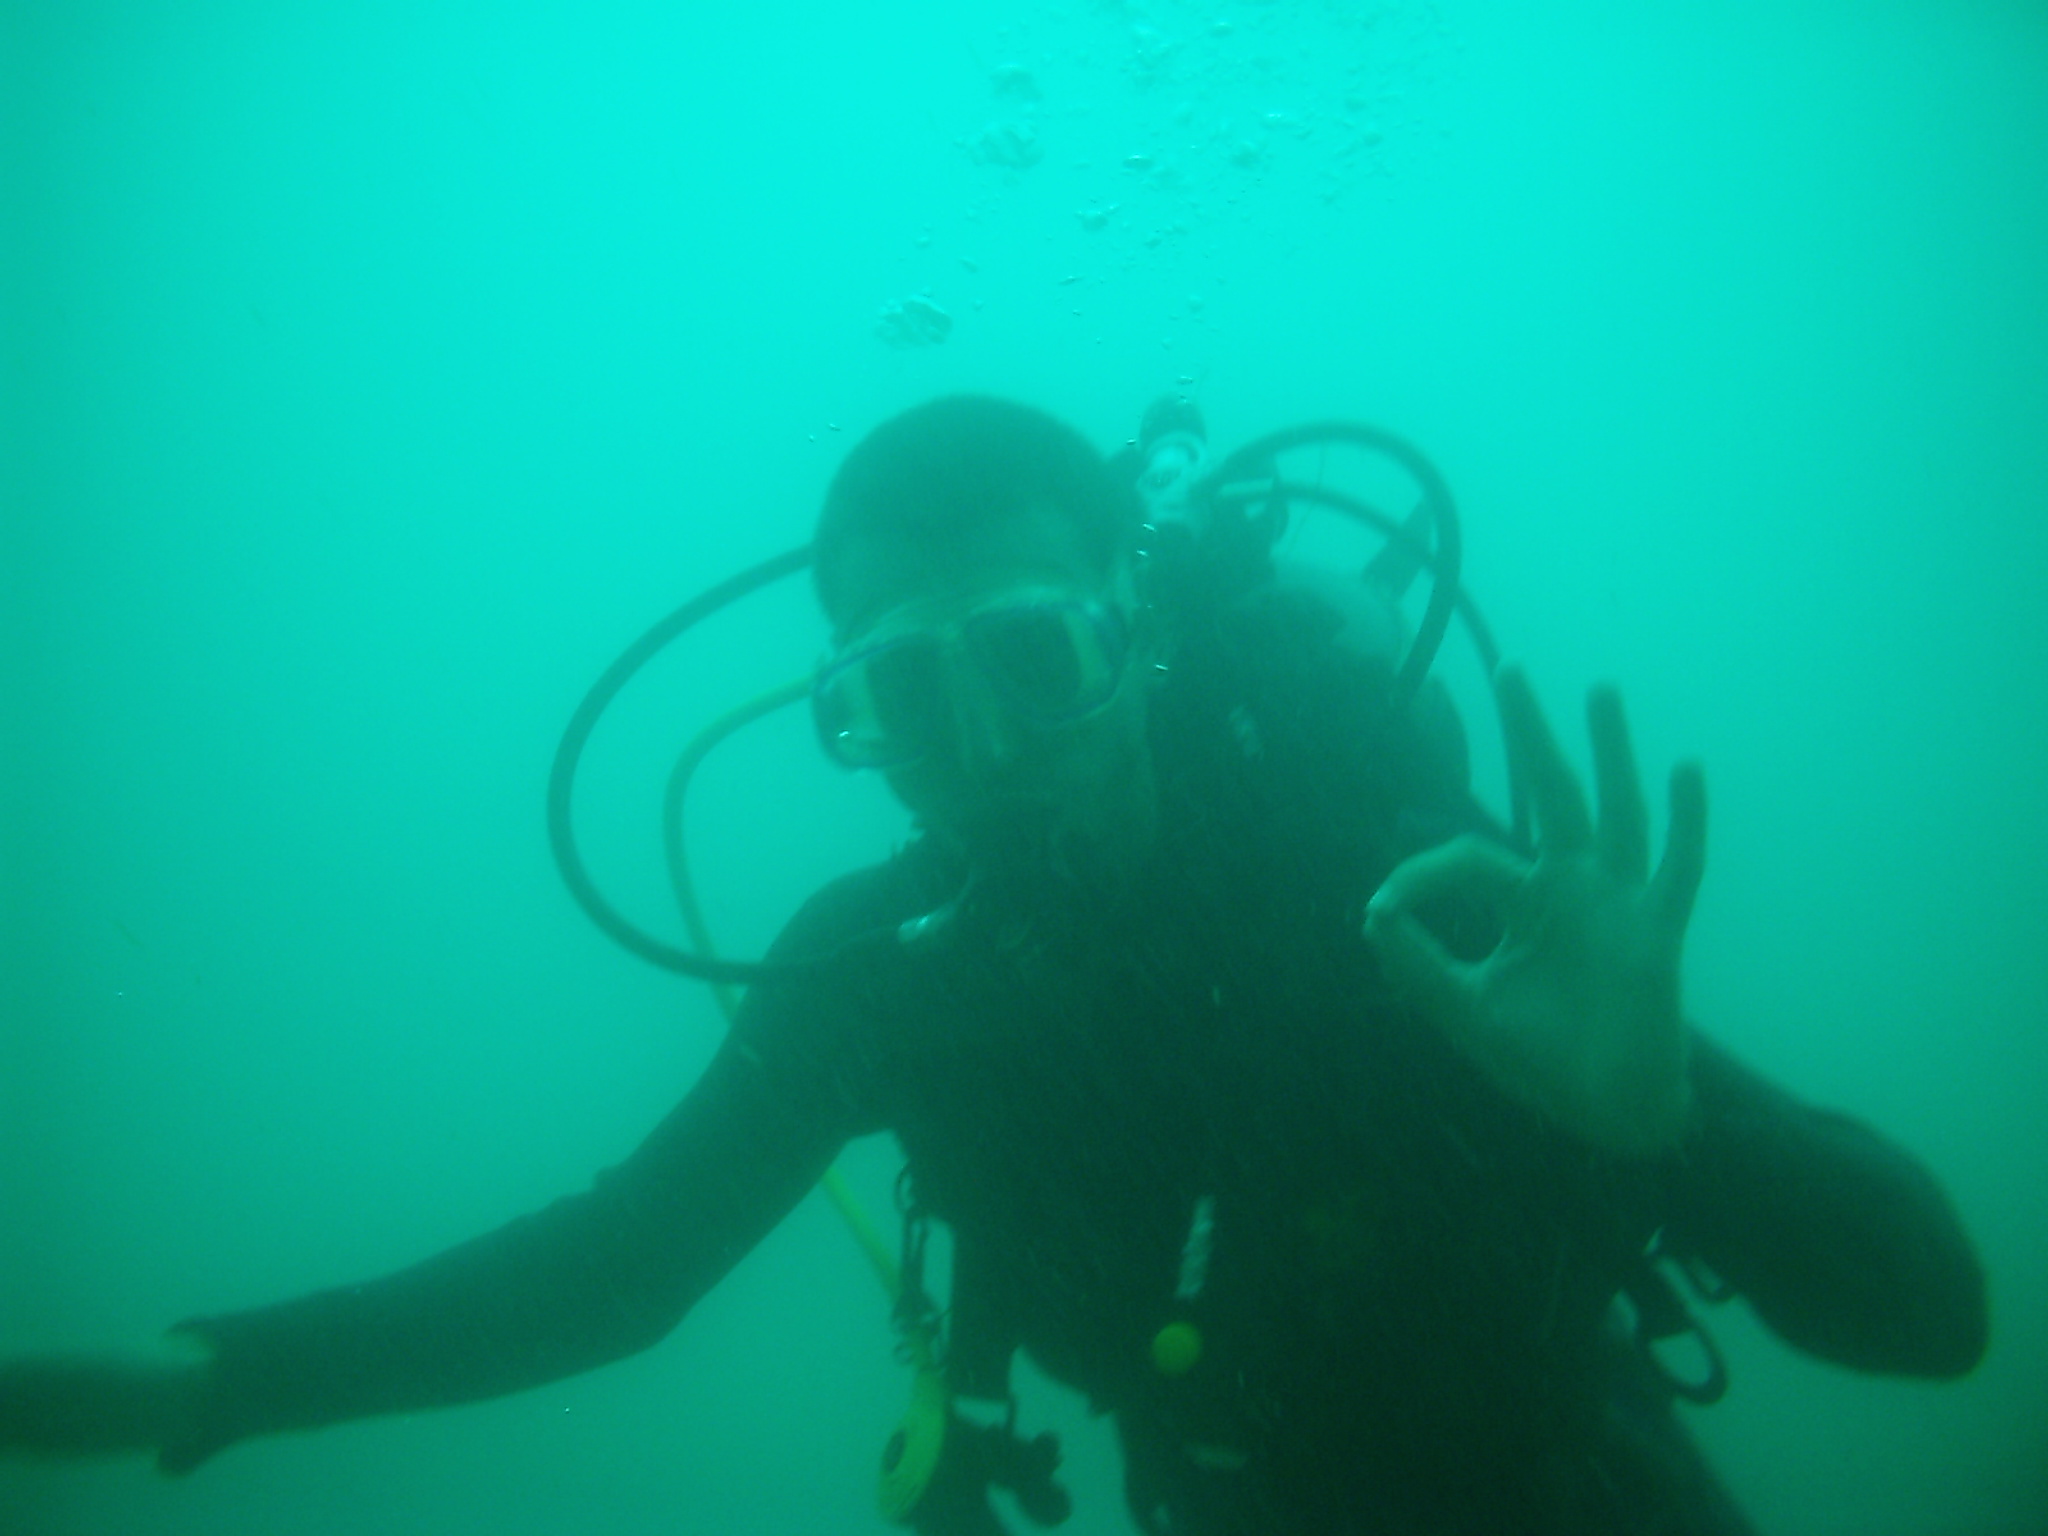 Diving with my Nephews